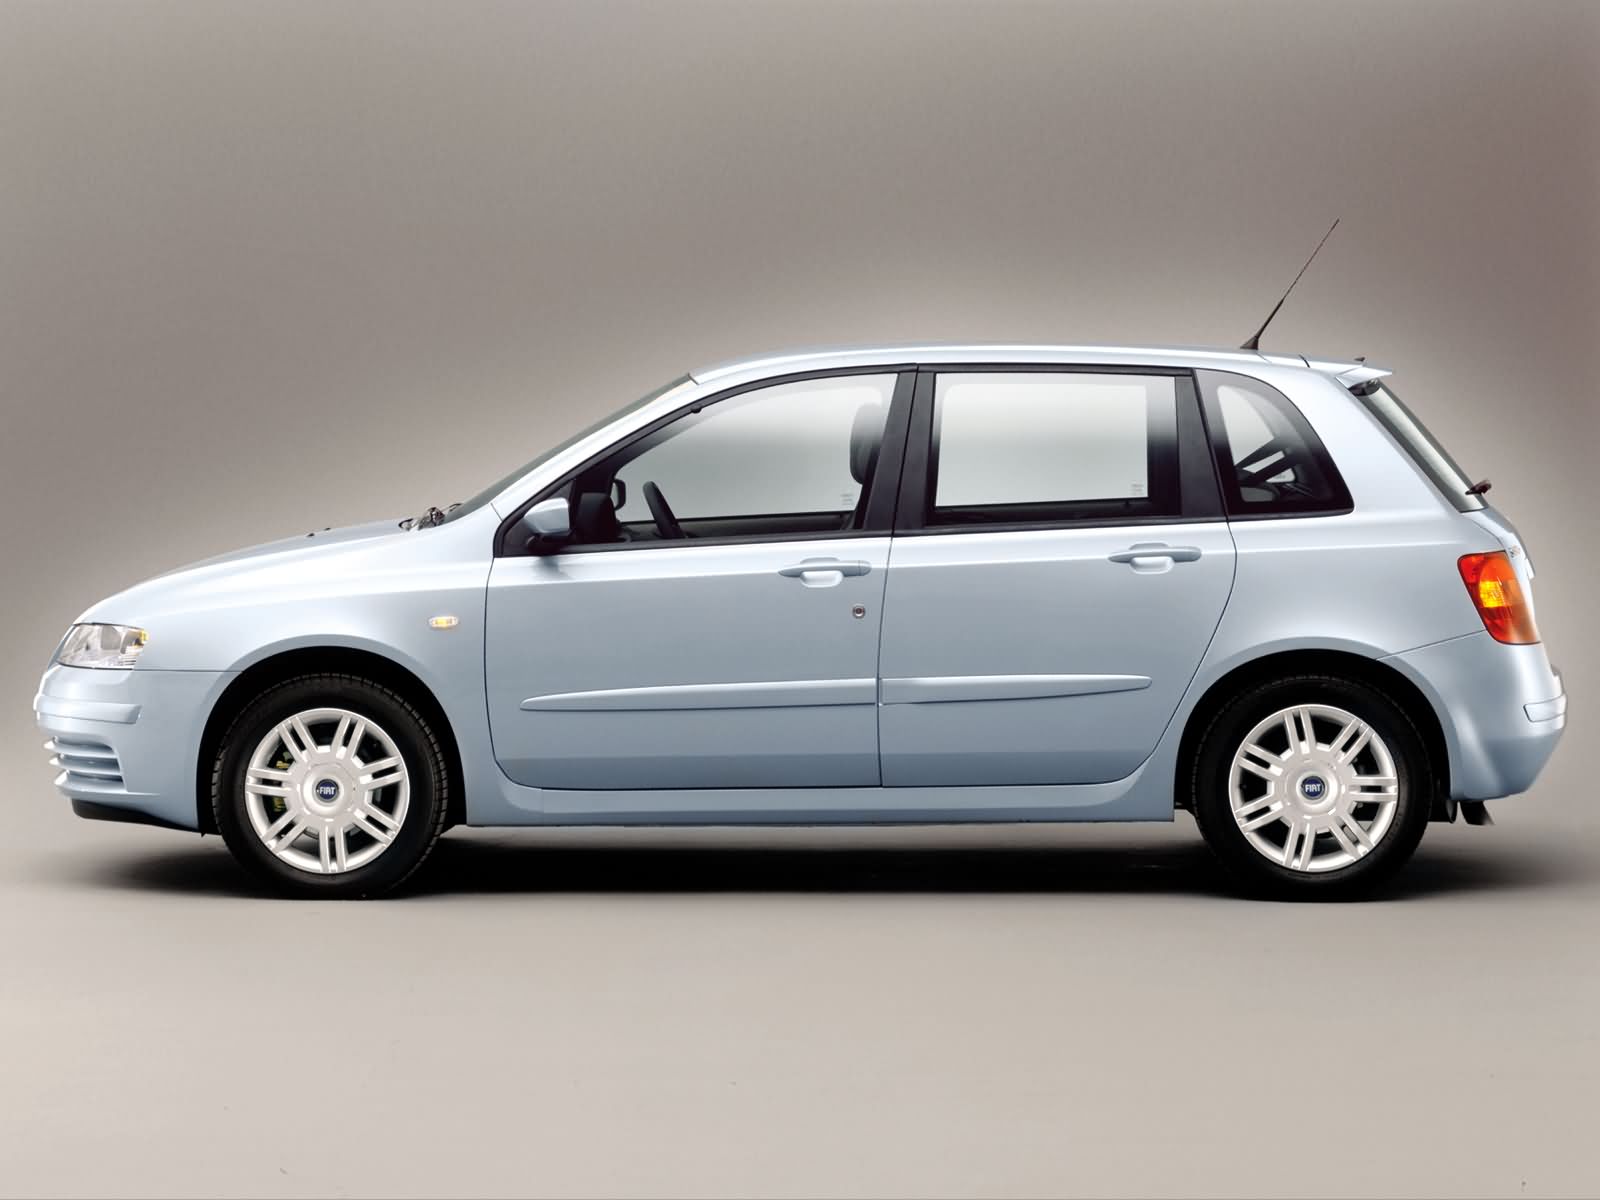 You can use this Fiat Stilo photo #5257 as wallpaper (poster) for desktop